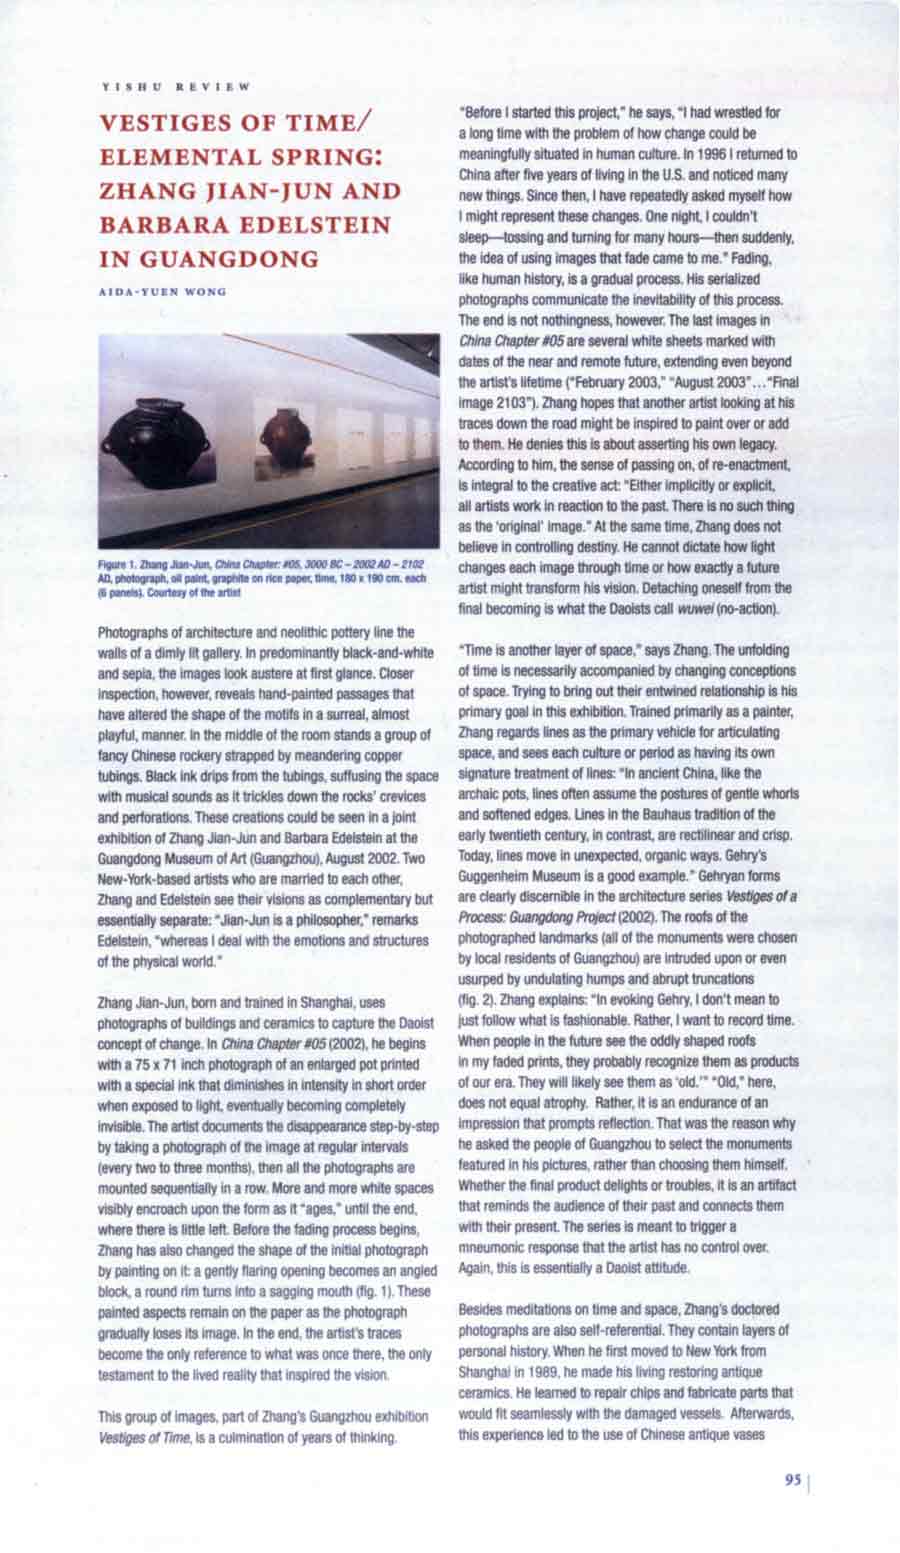 Vestiges of Time / Elemental Spring: Zhang Jian-Jun and Barbara Edelstein in Guangdong, review, pg 1